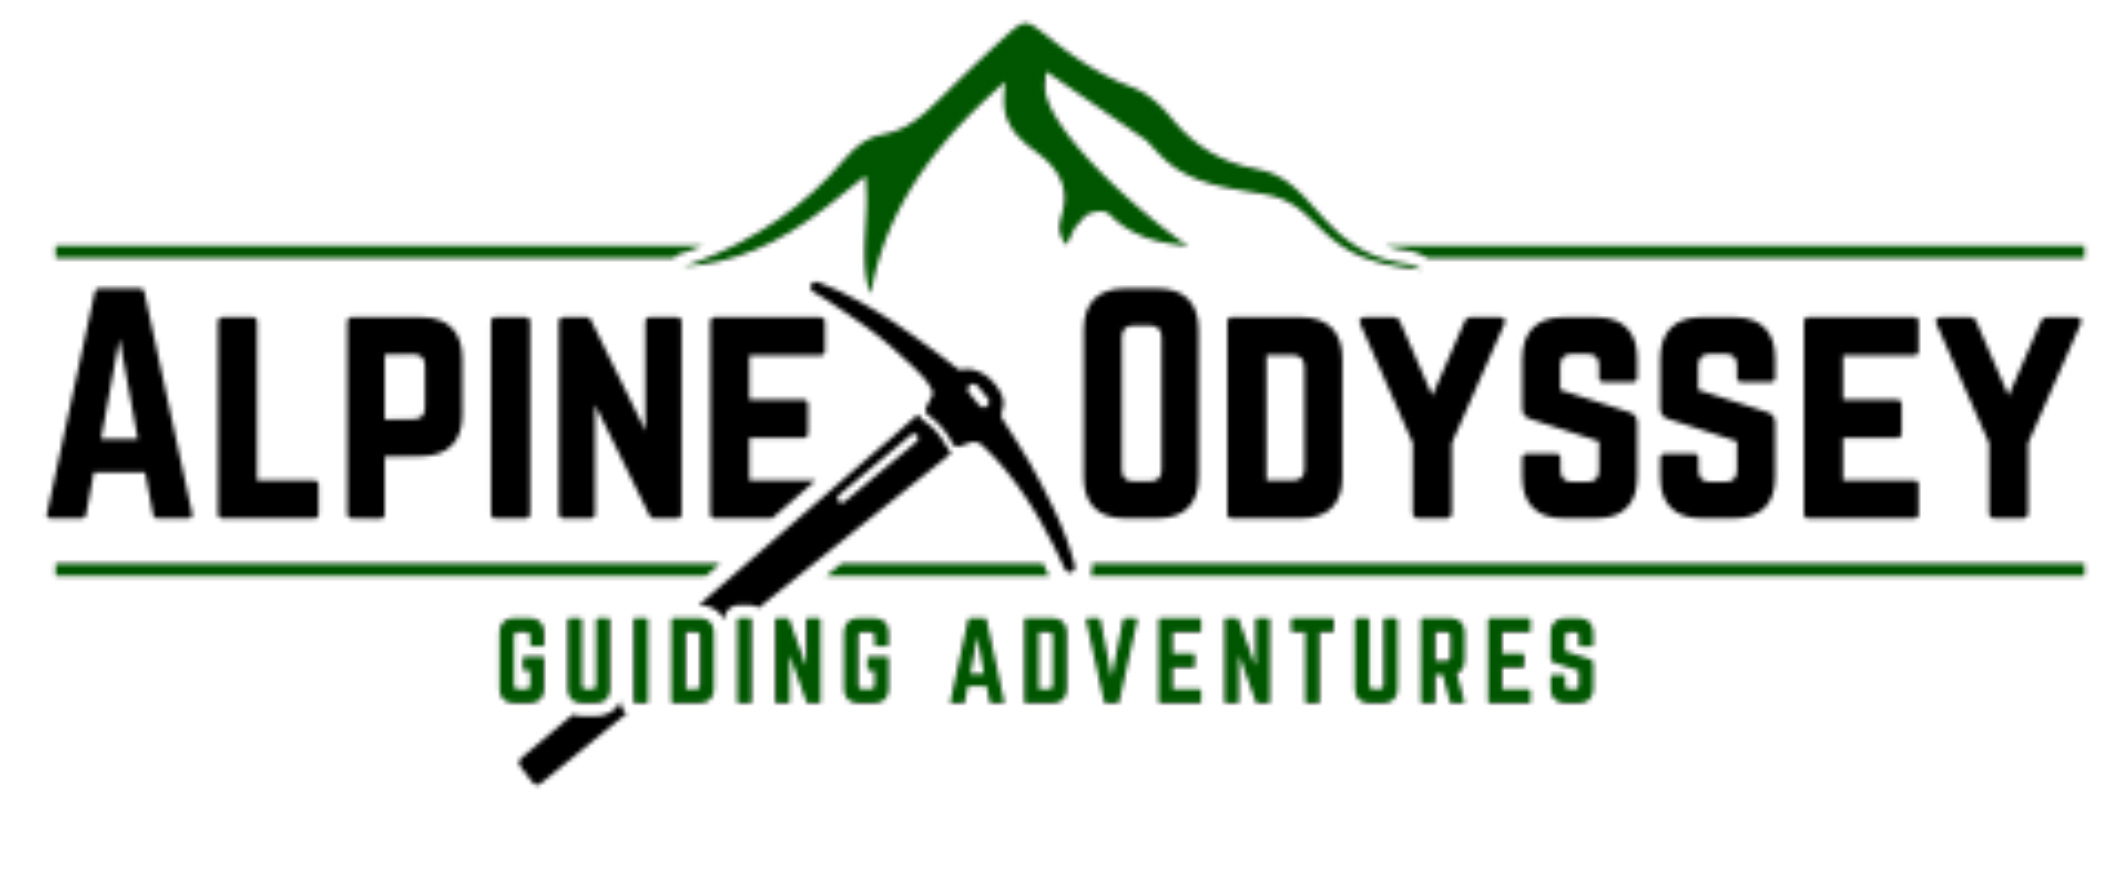 Alpine Odyssey Guiding Adventures – Canmore, AB and Golden, BC Ice Climbing, Rock Climbing &amp; Mountaineering 